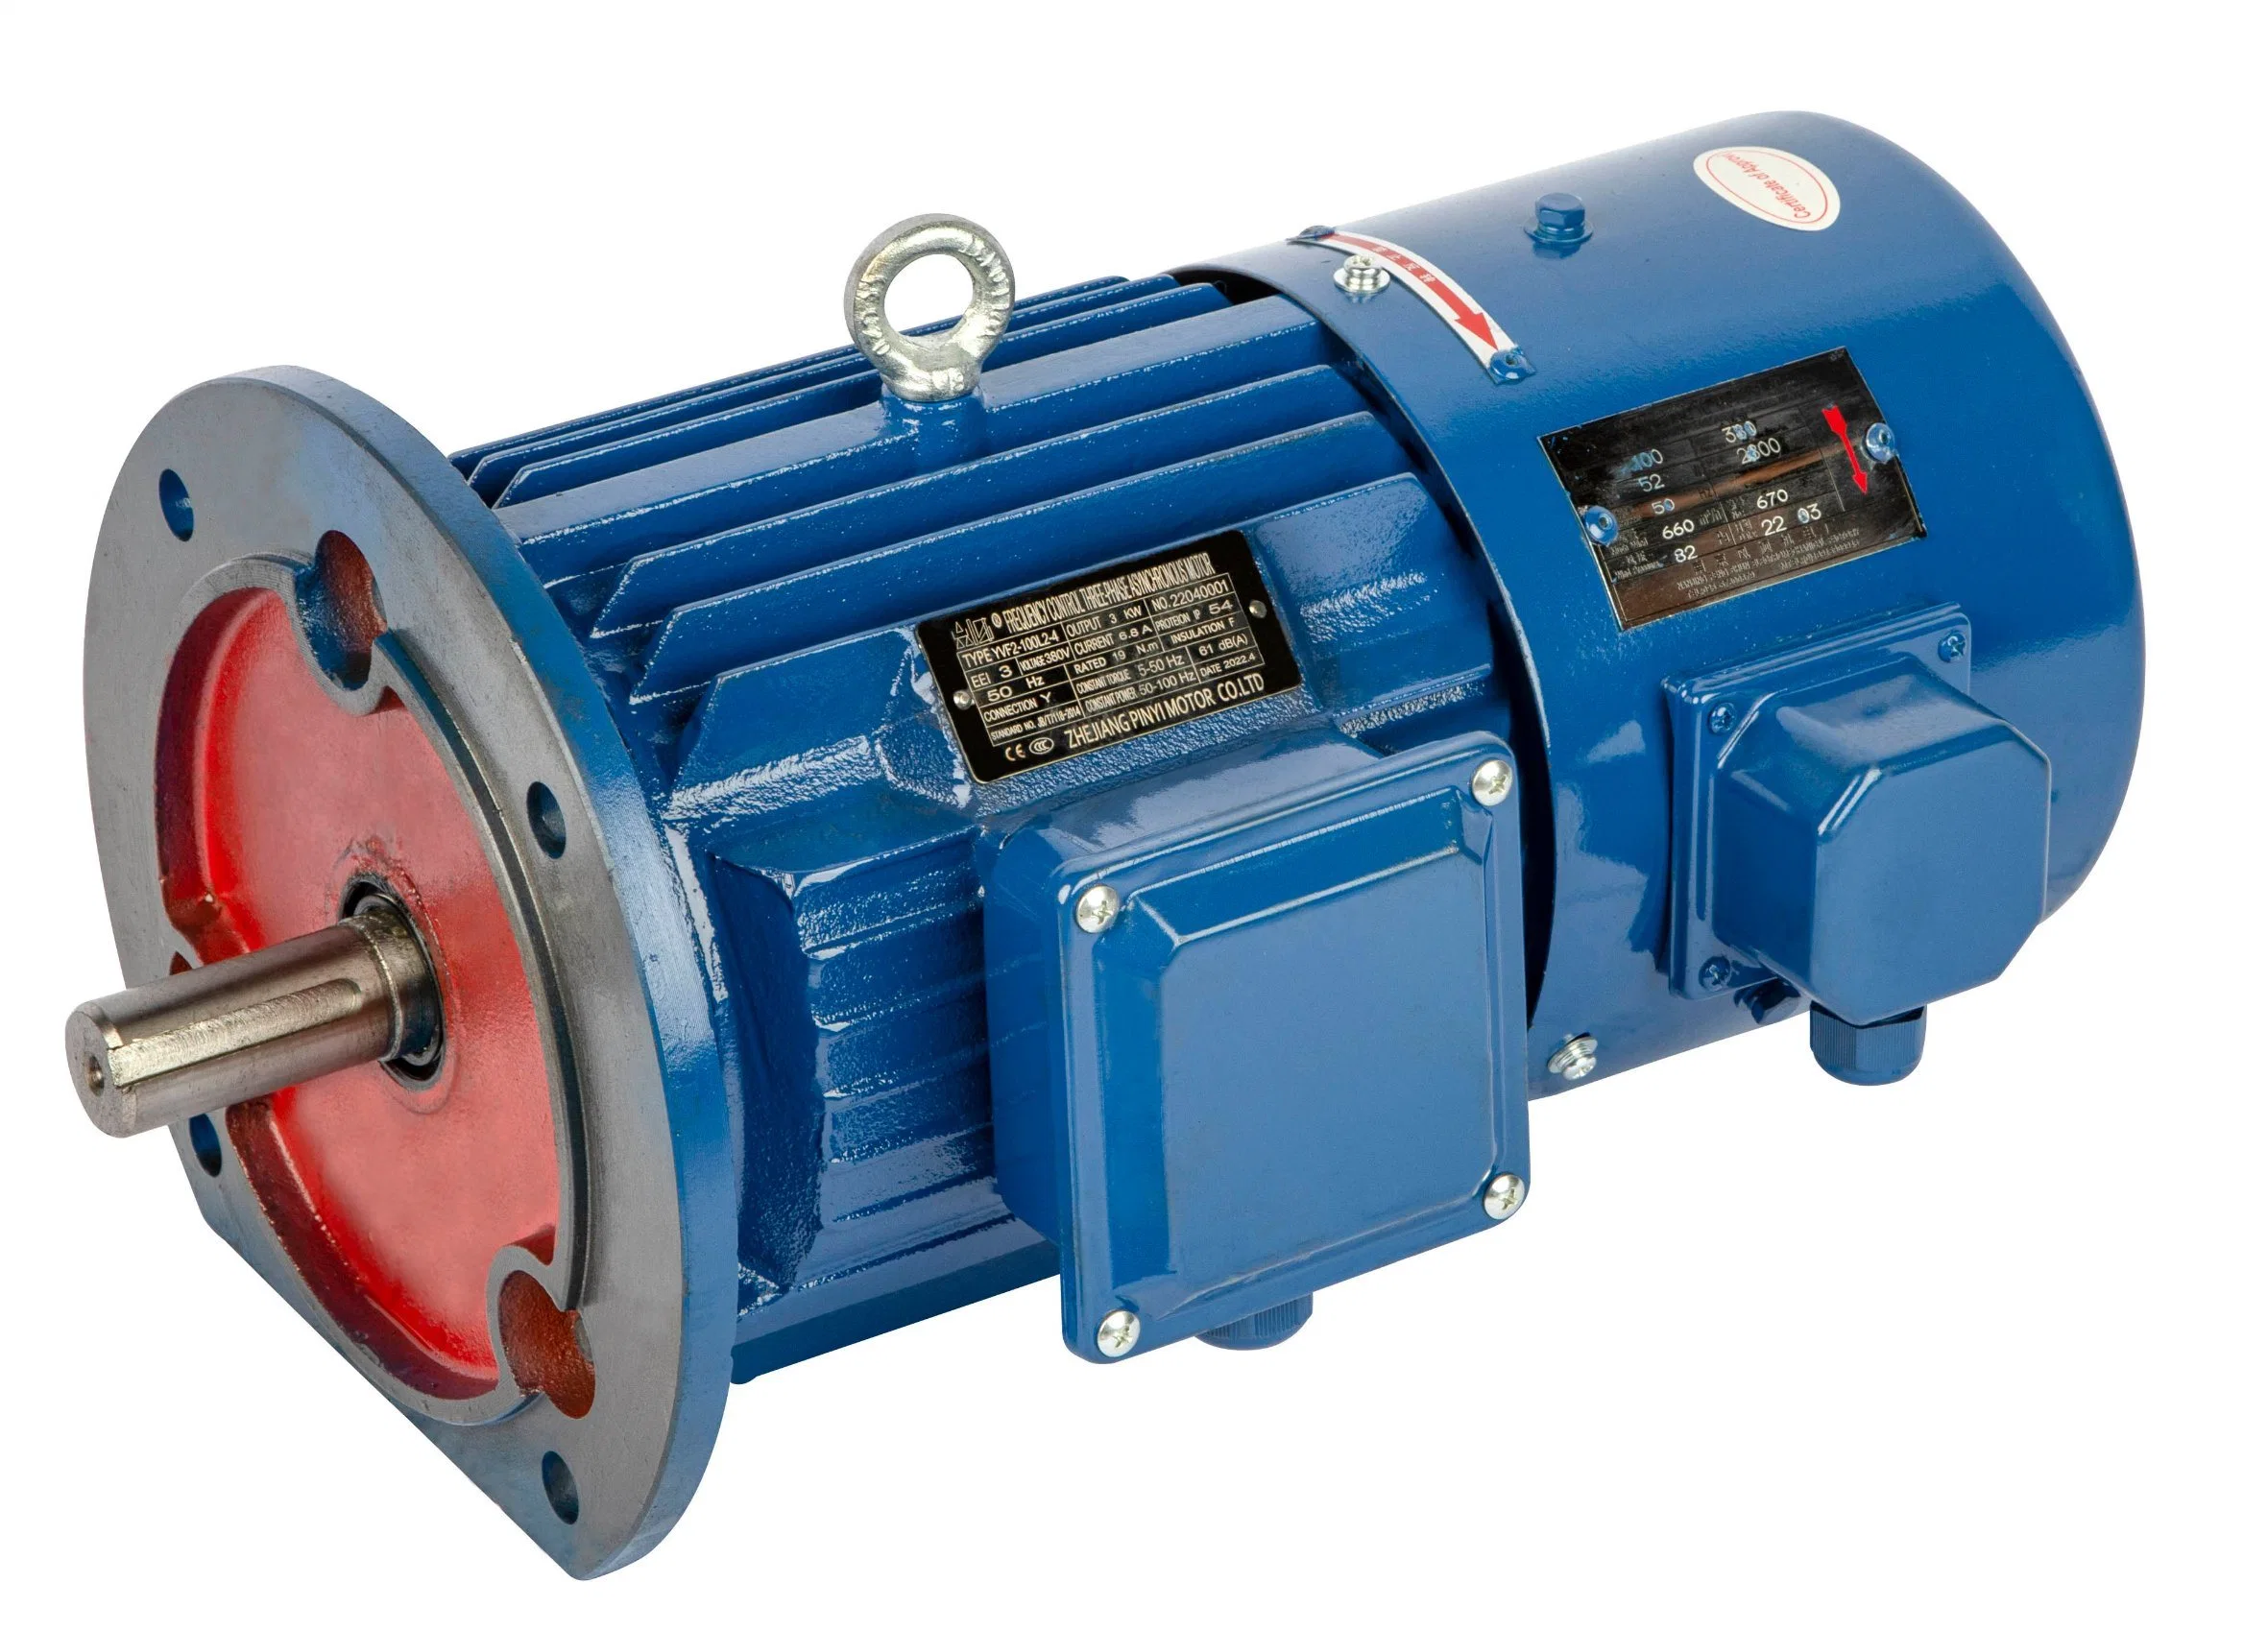 Yvf2 Series Frequency Conversion Adjustable Speed 3 Phase Asynchronous Induction Motor for Water Pump